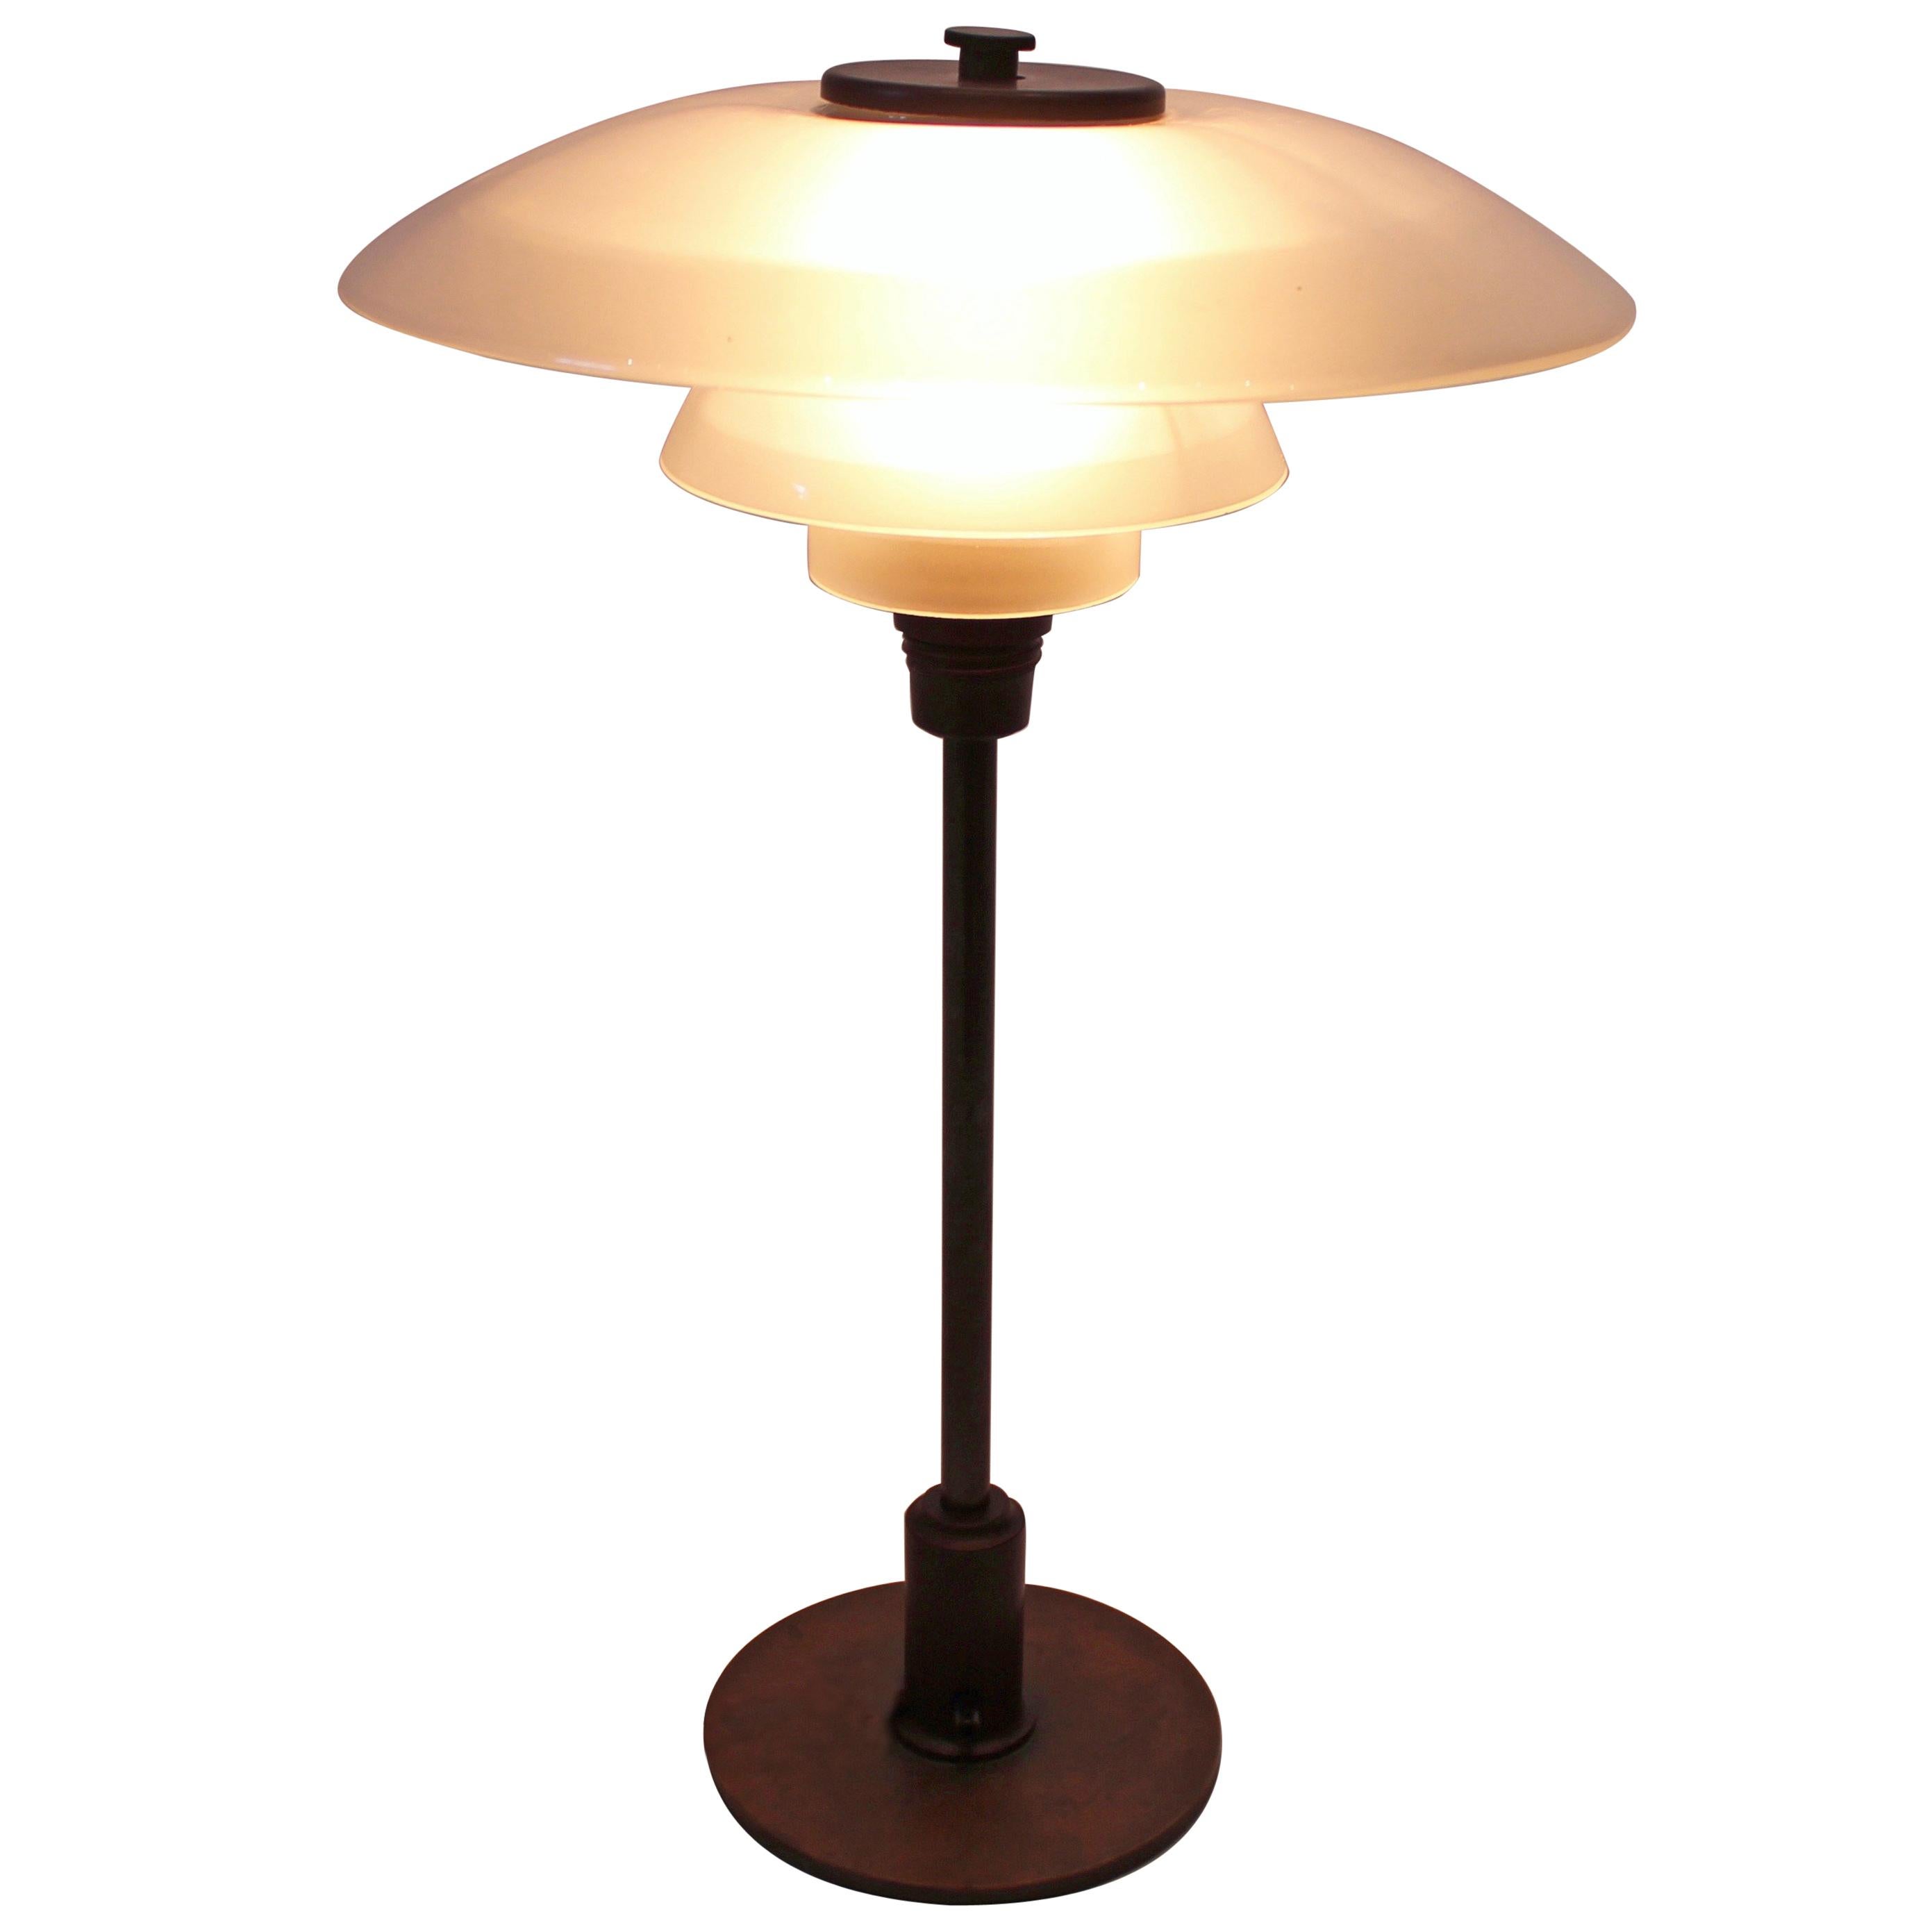 PH 3/2 Table Lamp with Shades of Mat Glass, Poul Henningsen, 1928